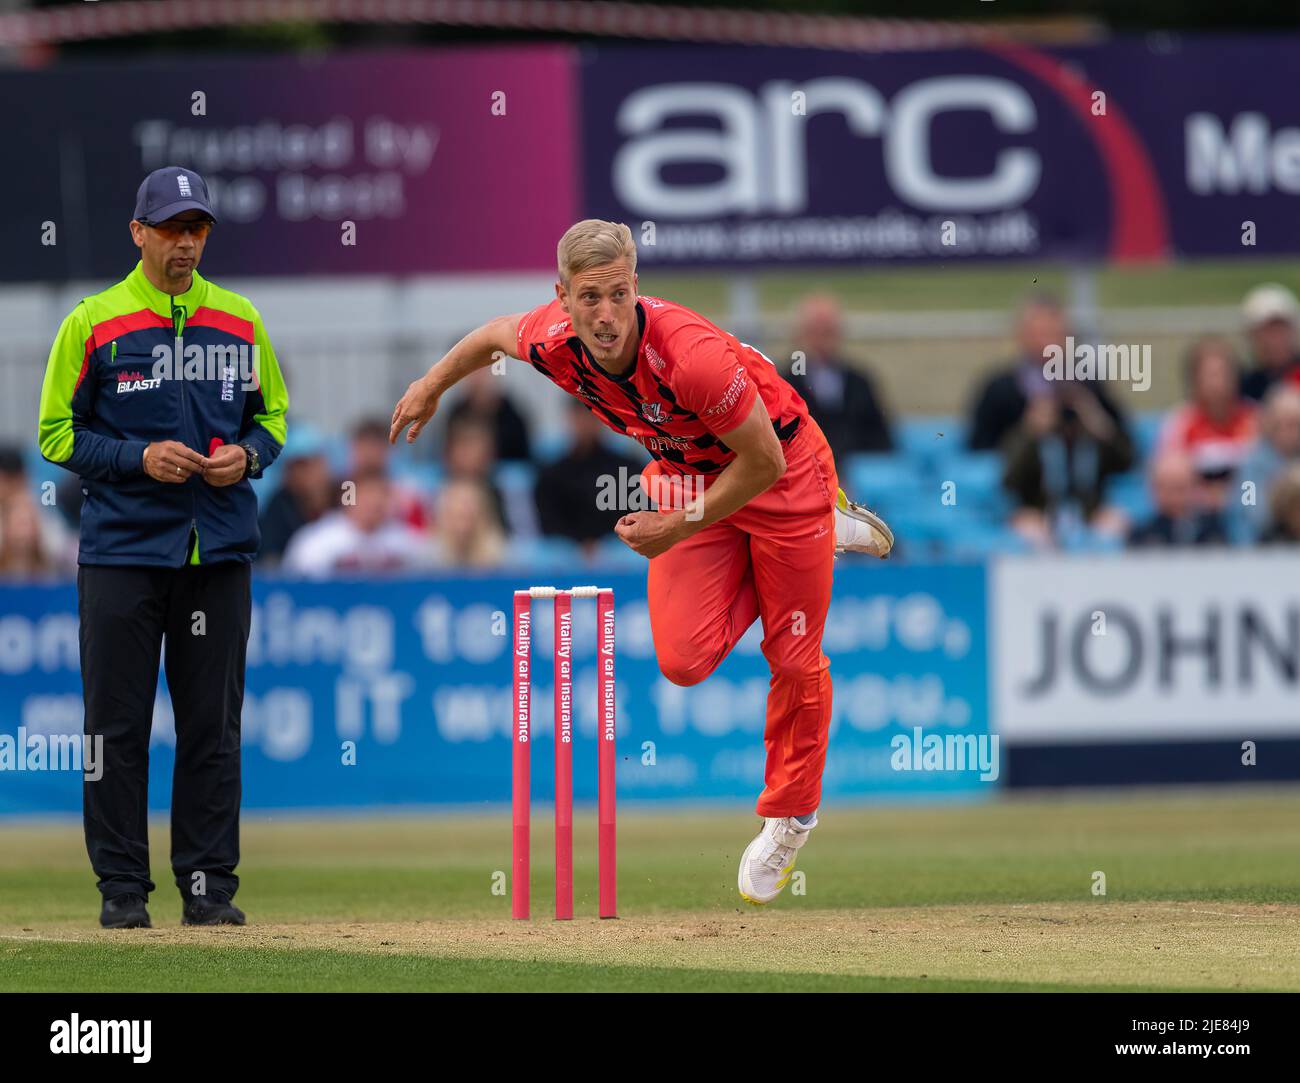 Luke Wood bowling for Lancashire Lightning against Derbyshire Falcons in a T20 Blast match Stock Photo